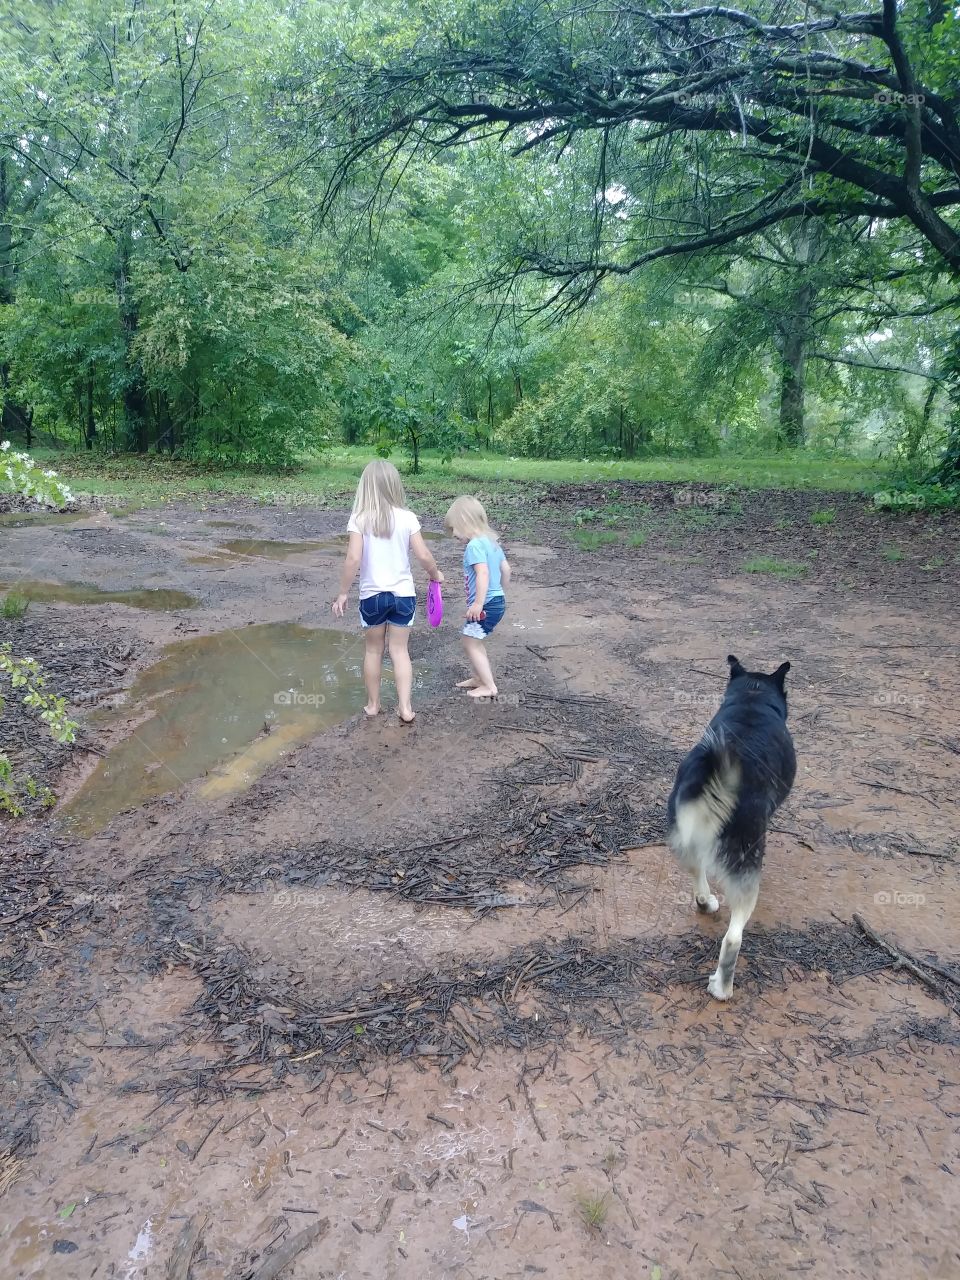 Play time in the mud puddle right after the rain.